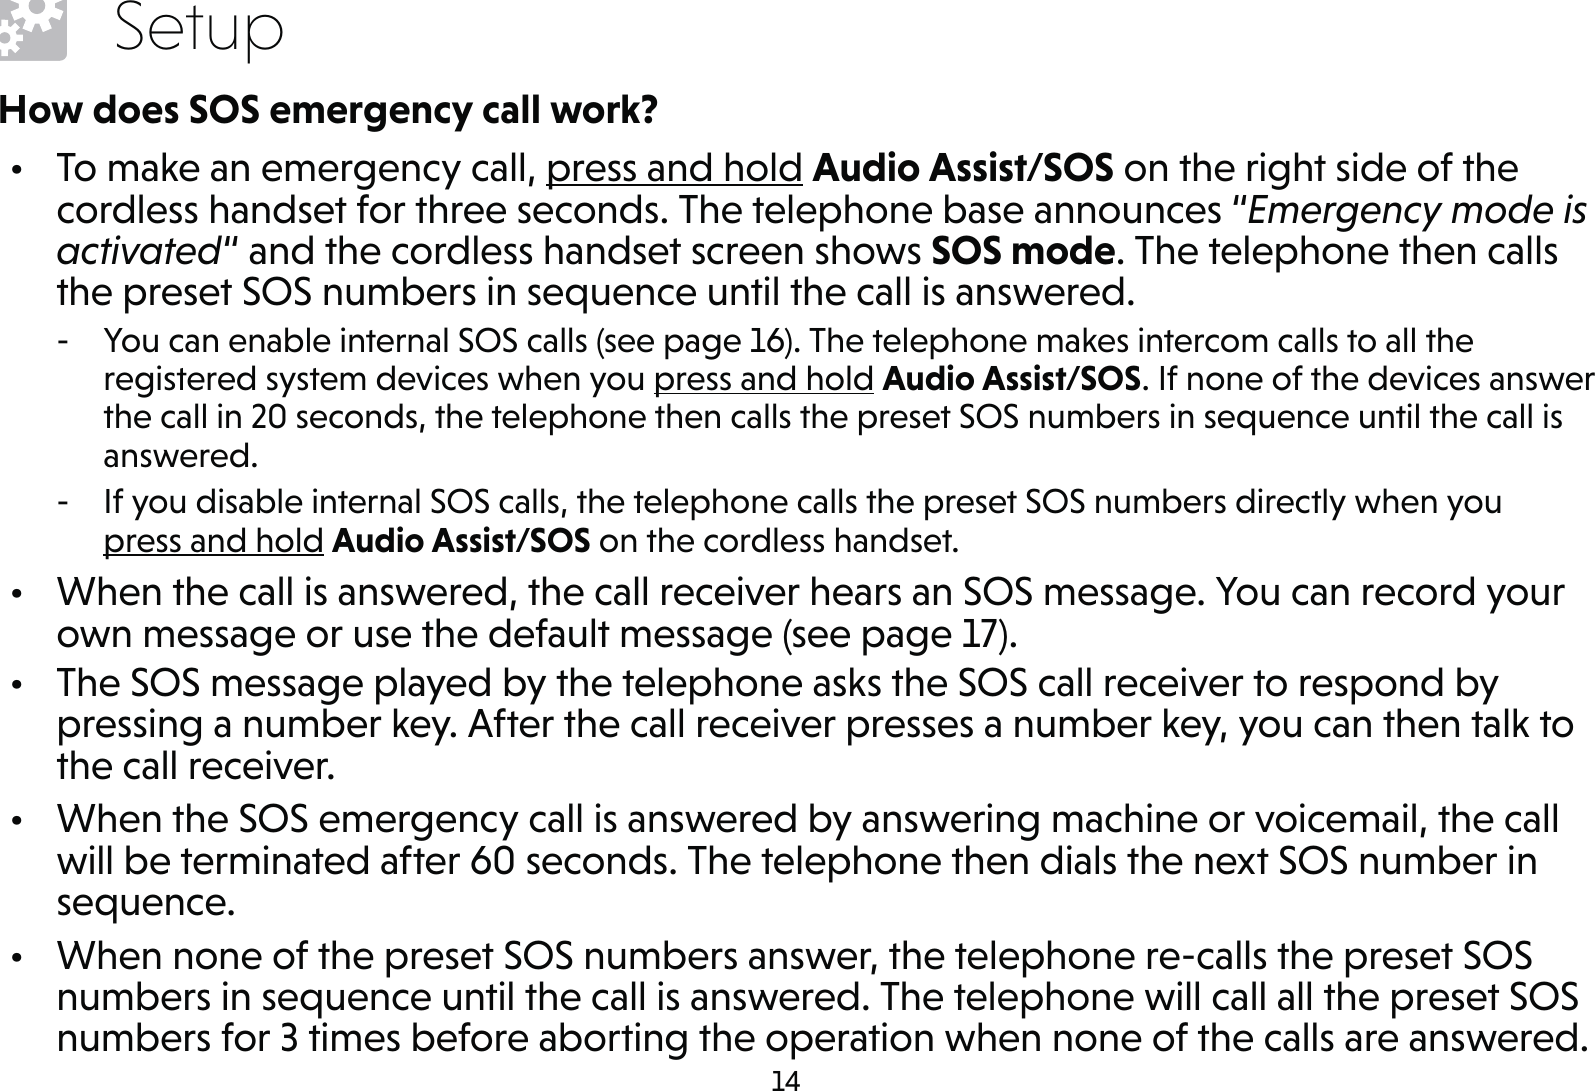 14SetupHow does SOS emergency call work?•  To make an emergency call, press and hold Audio Assist/SOS on the right side of the cordless handset for three seconds. The telephone base announces “Emergency mode is activated“ and the cordless handset screen shows SOS mode. The telephone then calls the preset SOS numbers in sequence until the call is answered. - You can enable internal SOS calls (see page 16). The telephone makes intercom calls to all the registered system devices when you press and hold Audio Assist/SOS. If none of the devices answer the call in 20 seconds, the telephone then calls the preset SOS numbers in sequence until the call is answered. - If you disable internal SOS calls, the telephone calls the preset SOS numbers directly when you  press and hold Audio Assist/SOS on the cordless handset.•  When the call is answered, the call receiver hears an SOS message. You can record your own message or use the default message (see page 17).•  The SOS message played by the telephone asks the SOS call receiver to respond by pressing a number key. After the call receiver presses a number key, you can then talk to the call receiver.•  When the SOS emergency call is answered by answering machine or voicemail, the call will be terminated after 60 seconds. The telephone then dials the next SOS number in sequence.•  When none of the preset SOS numbers answer, the telephone re-calls the preset SOS numbers in sequence until the call is answered. The telephone will call all the preset SOS numbers for 3 times before aborting the operation when none of the calls are answered.